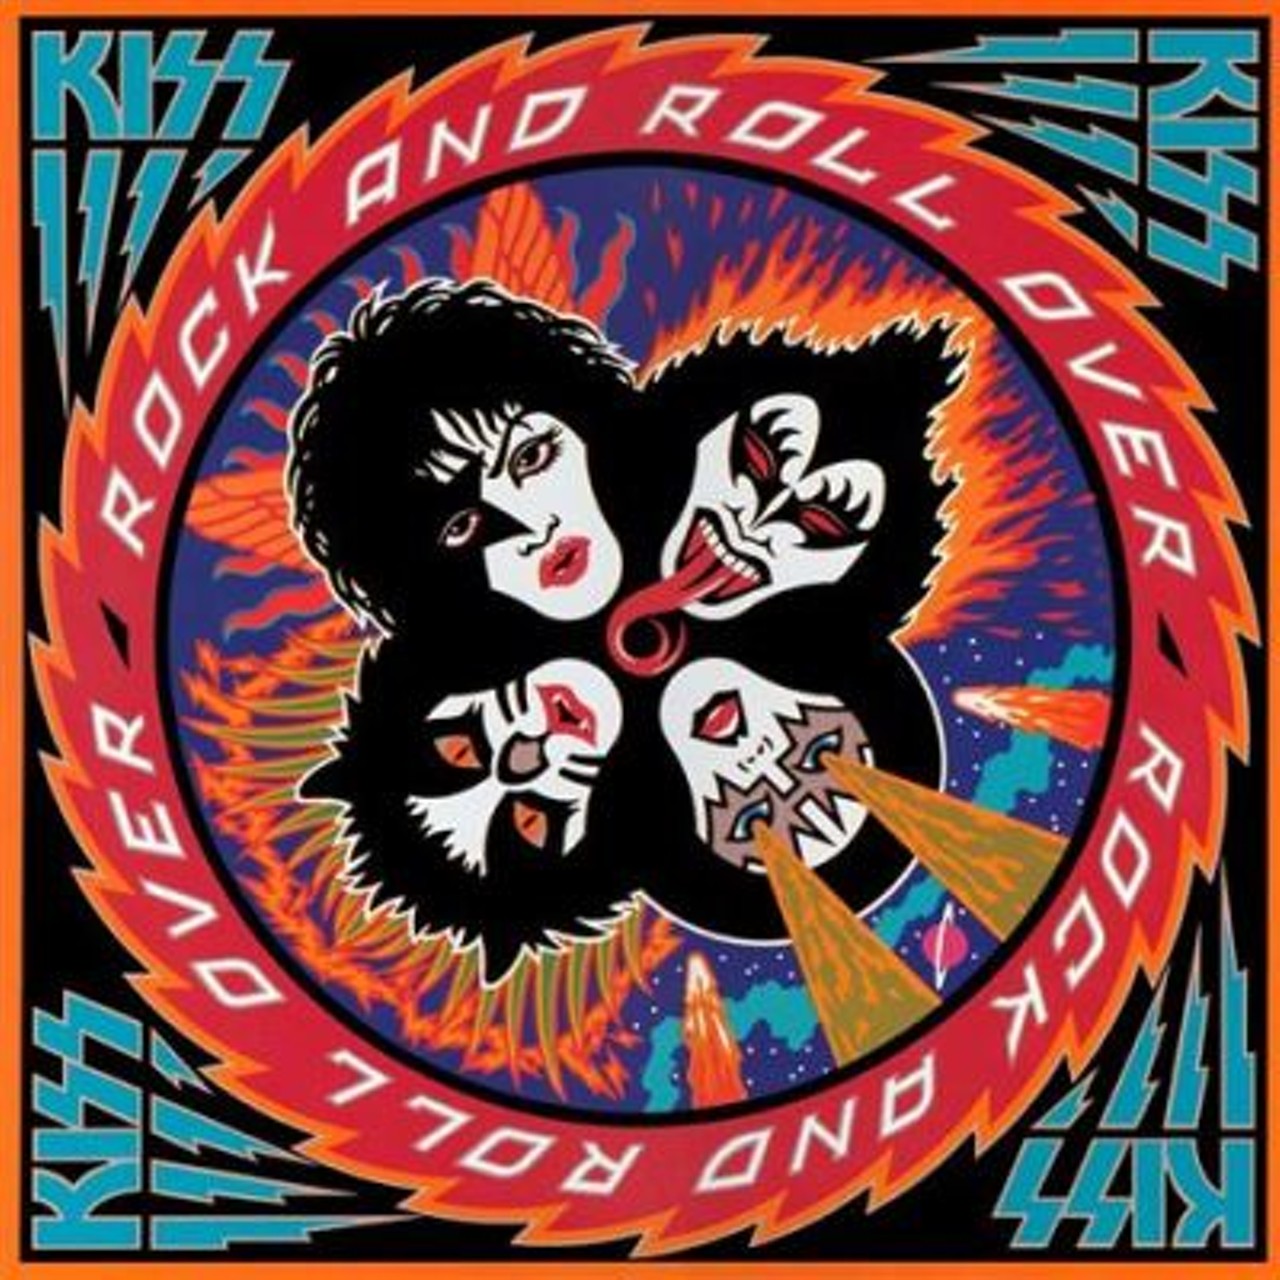 Rock and Roll Over falls into the era of “classic KISS.” It was an attempt to reach out to the fans of its first three more barebones rock albums following the lavish production that was Destroyer and the success of the ballad “Beth.” Rock and Roll Over has some big KISS songs like “I Want You,” “Calling Dr. Love” and “Hard Luck Woman” but it is an inconsistent record that comes off as a little undercooked, especially in the lyrics department. Lyrically, the band has never been particularly profound, but “Baby Driver” and “Take Me” are exceptionally sophomoric and uncreative. For example: “Put your hand into my pocket grab onto my rocket . . .” You see? – A little too Spinal Tap.